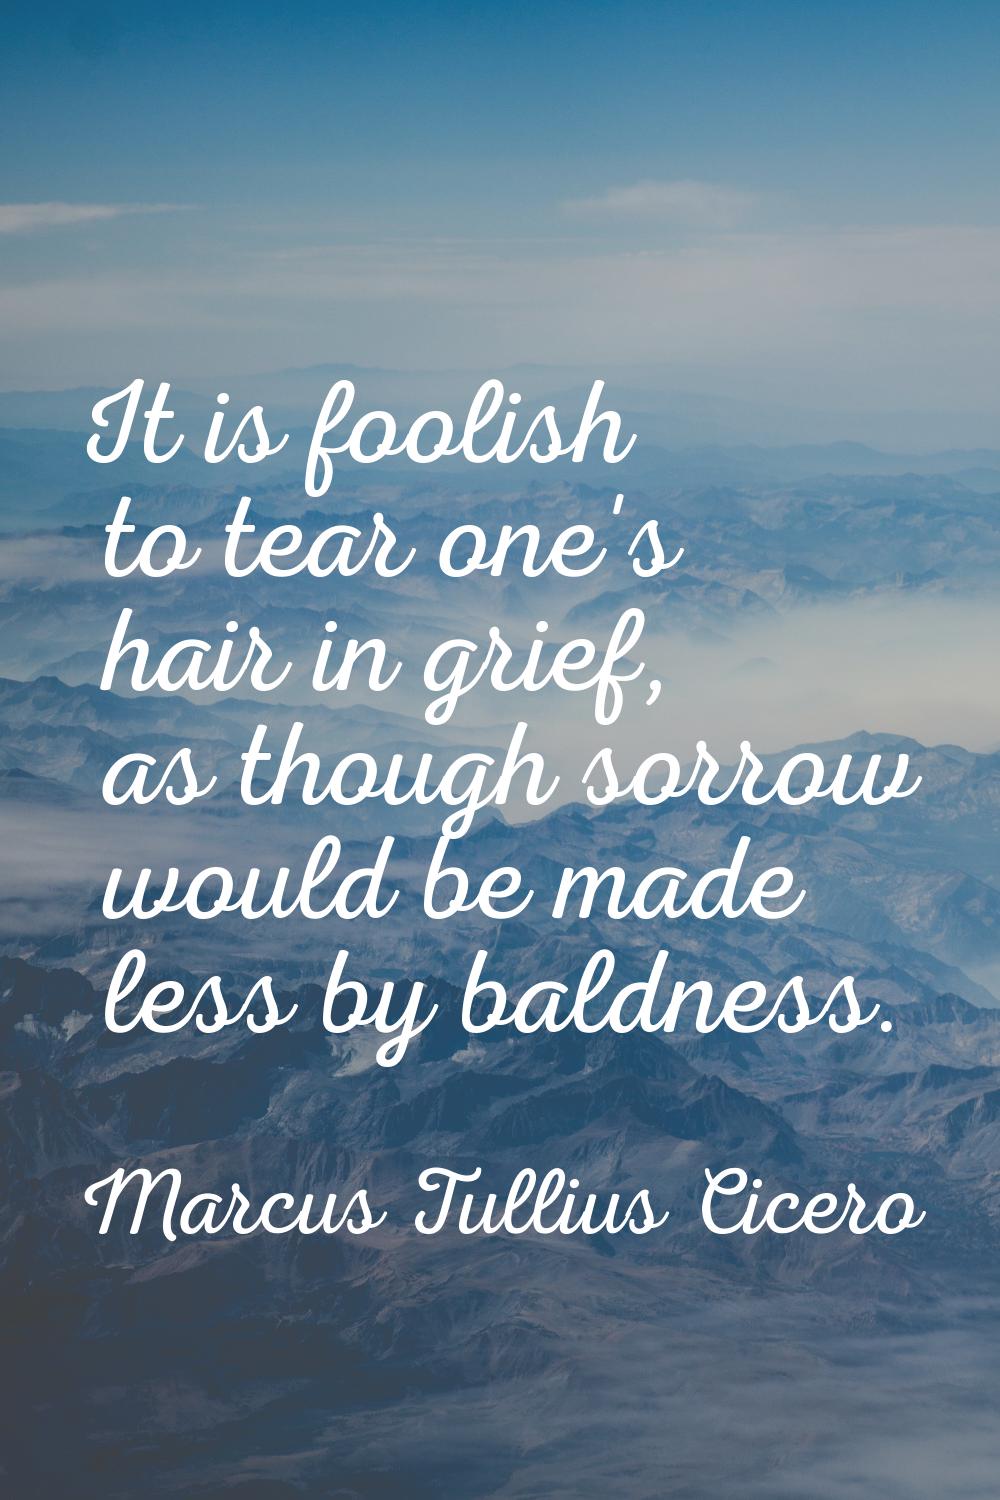 It is foolish to tear one's hair in grief, as though sorrow would be made less by baldness.